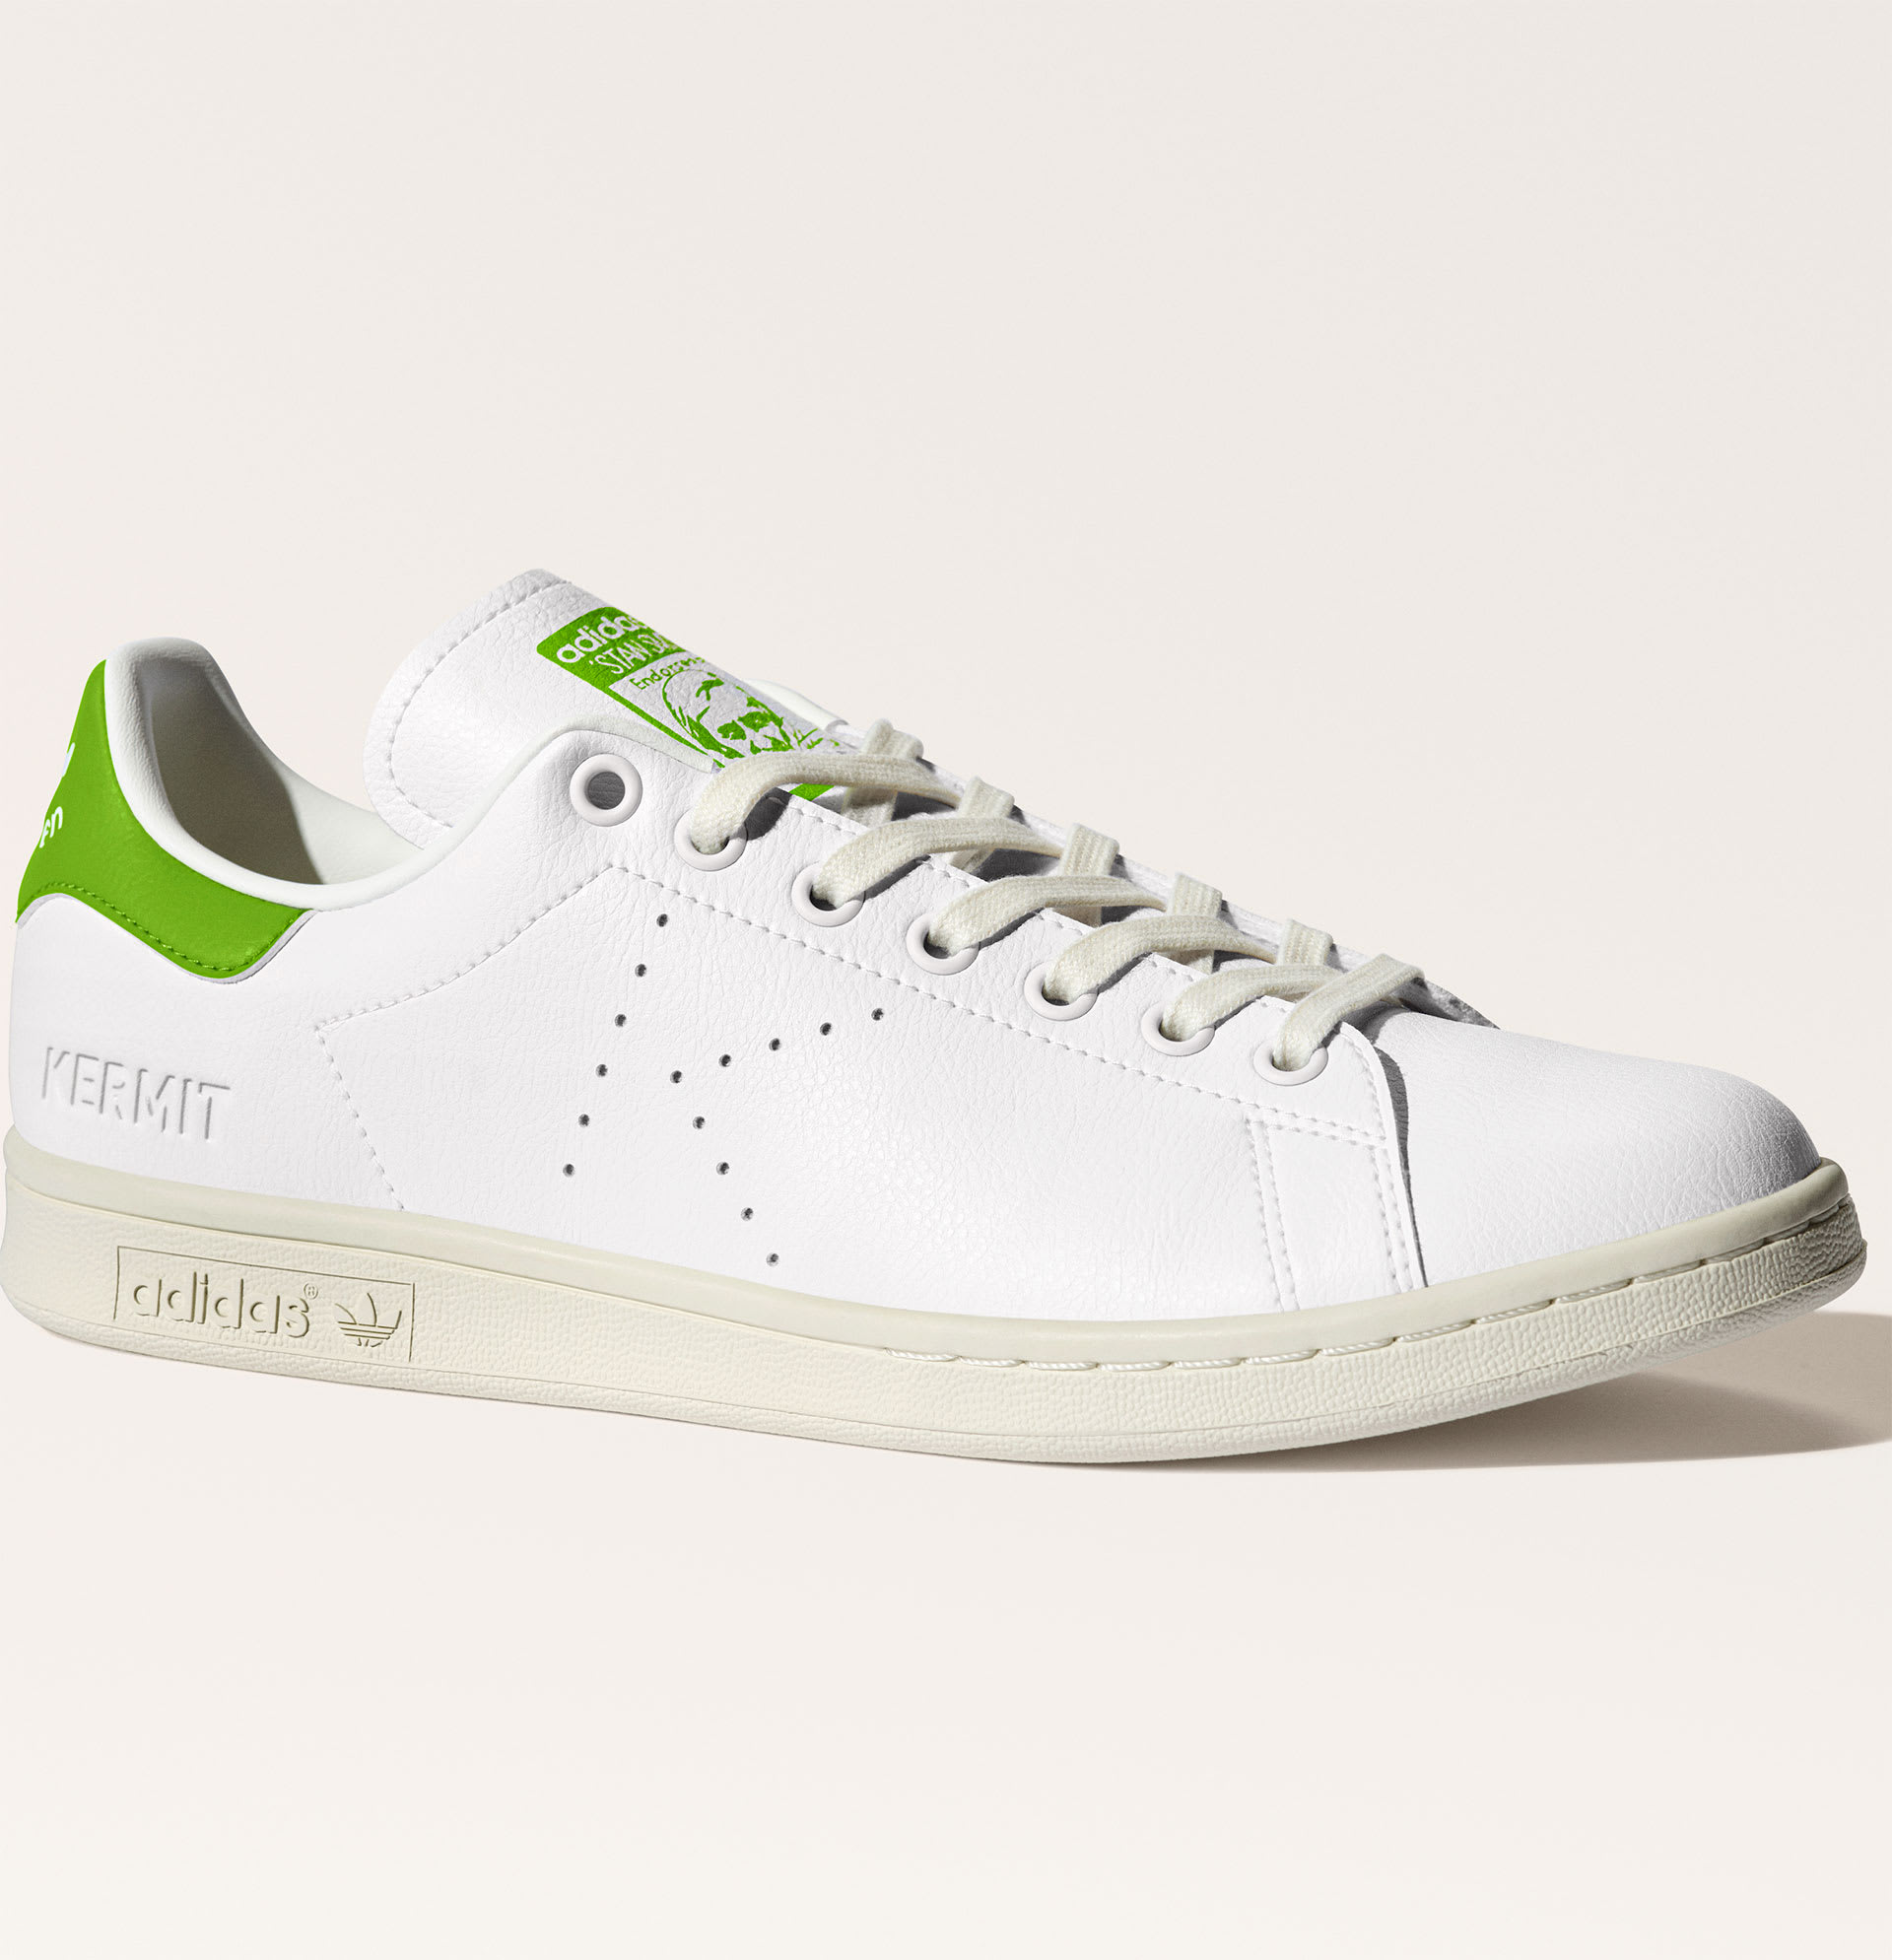 Kermit the Frog adidas Stan Smith sneakers side